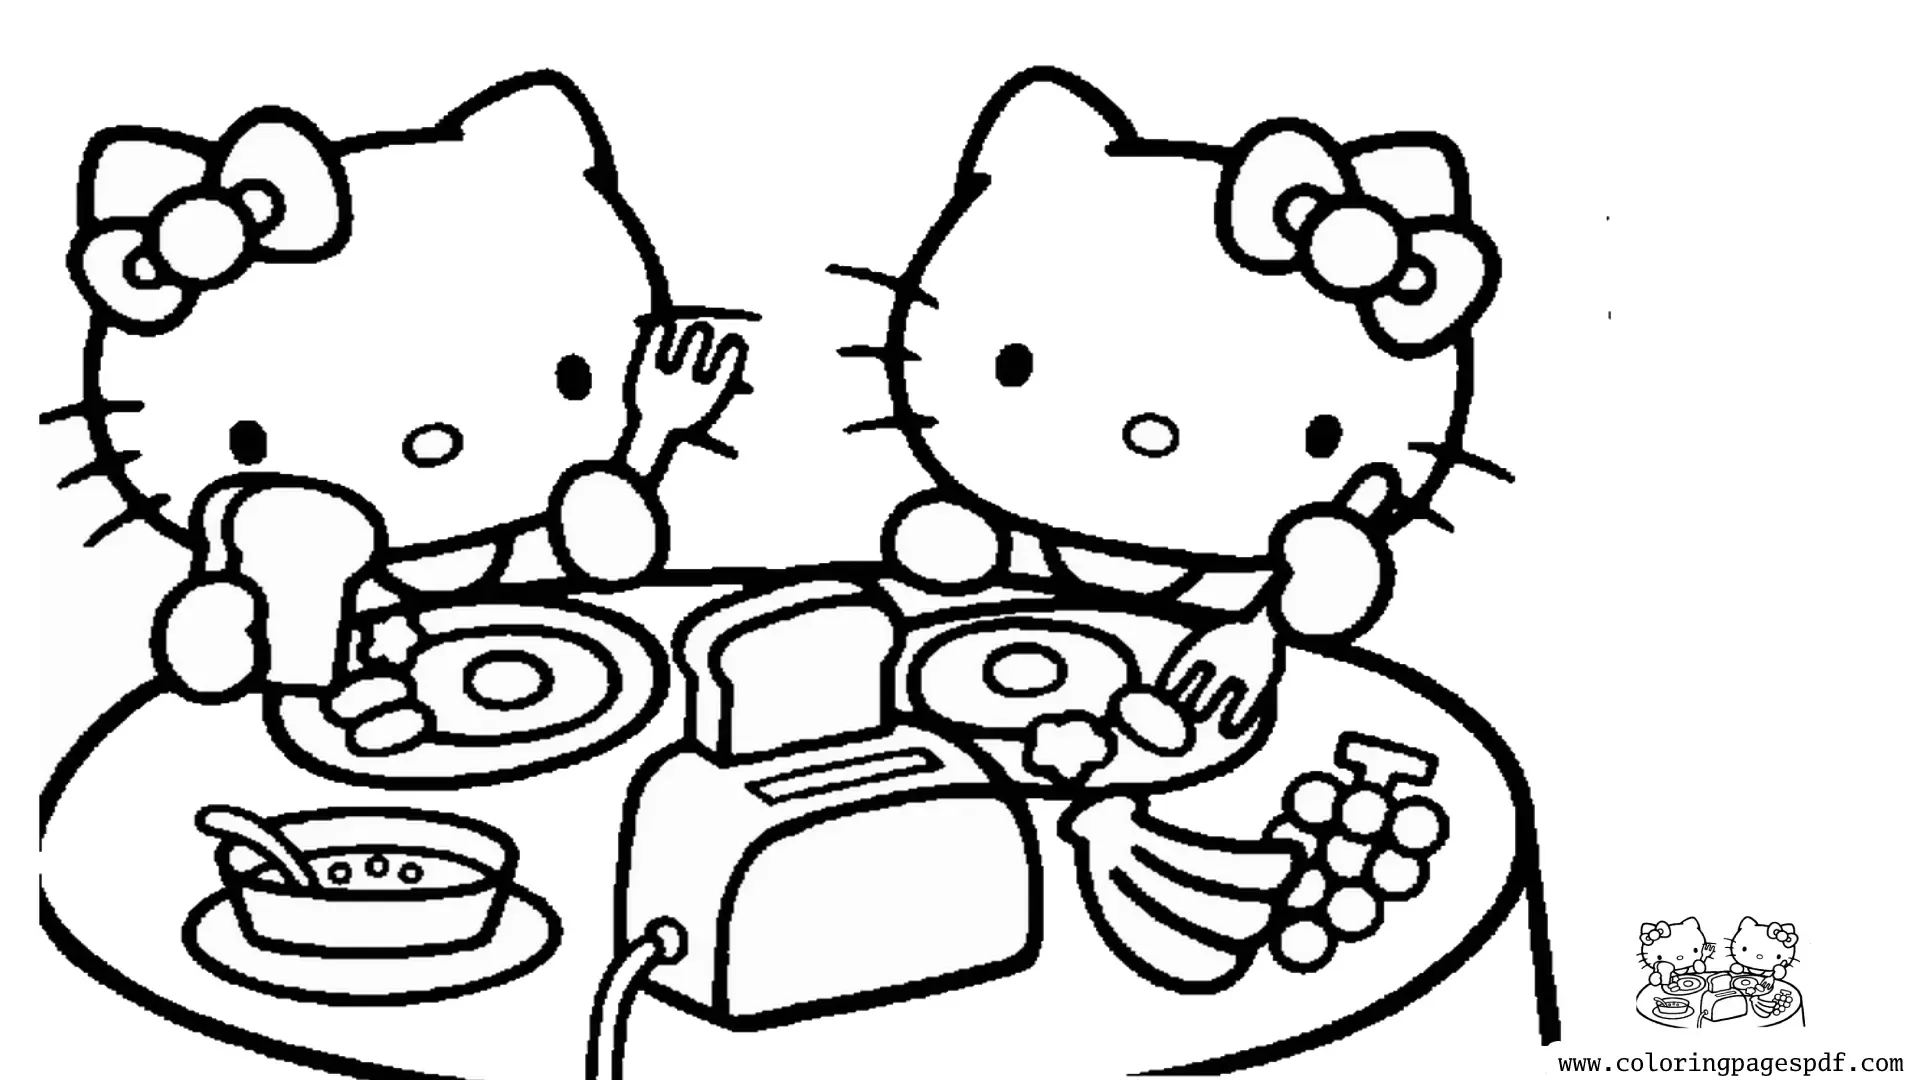 Coloring Page Of Hello Kitty Eating Breakfast